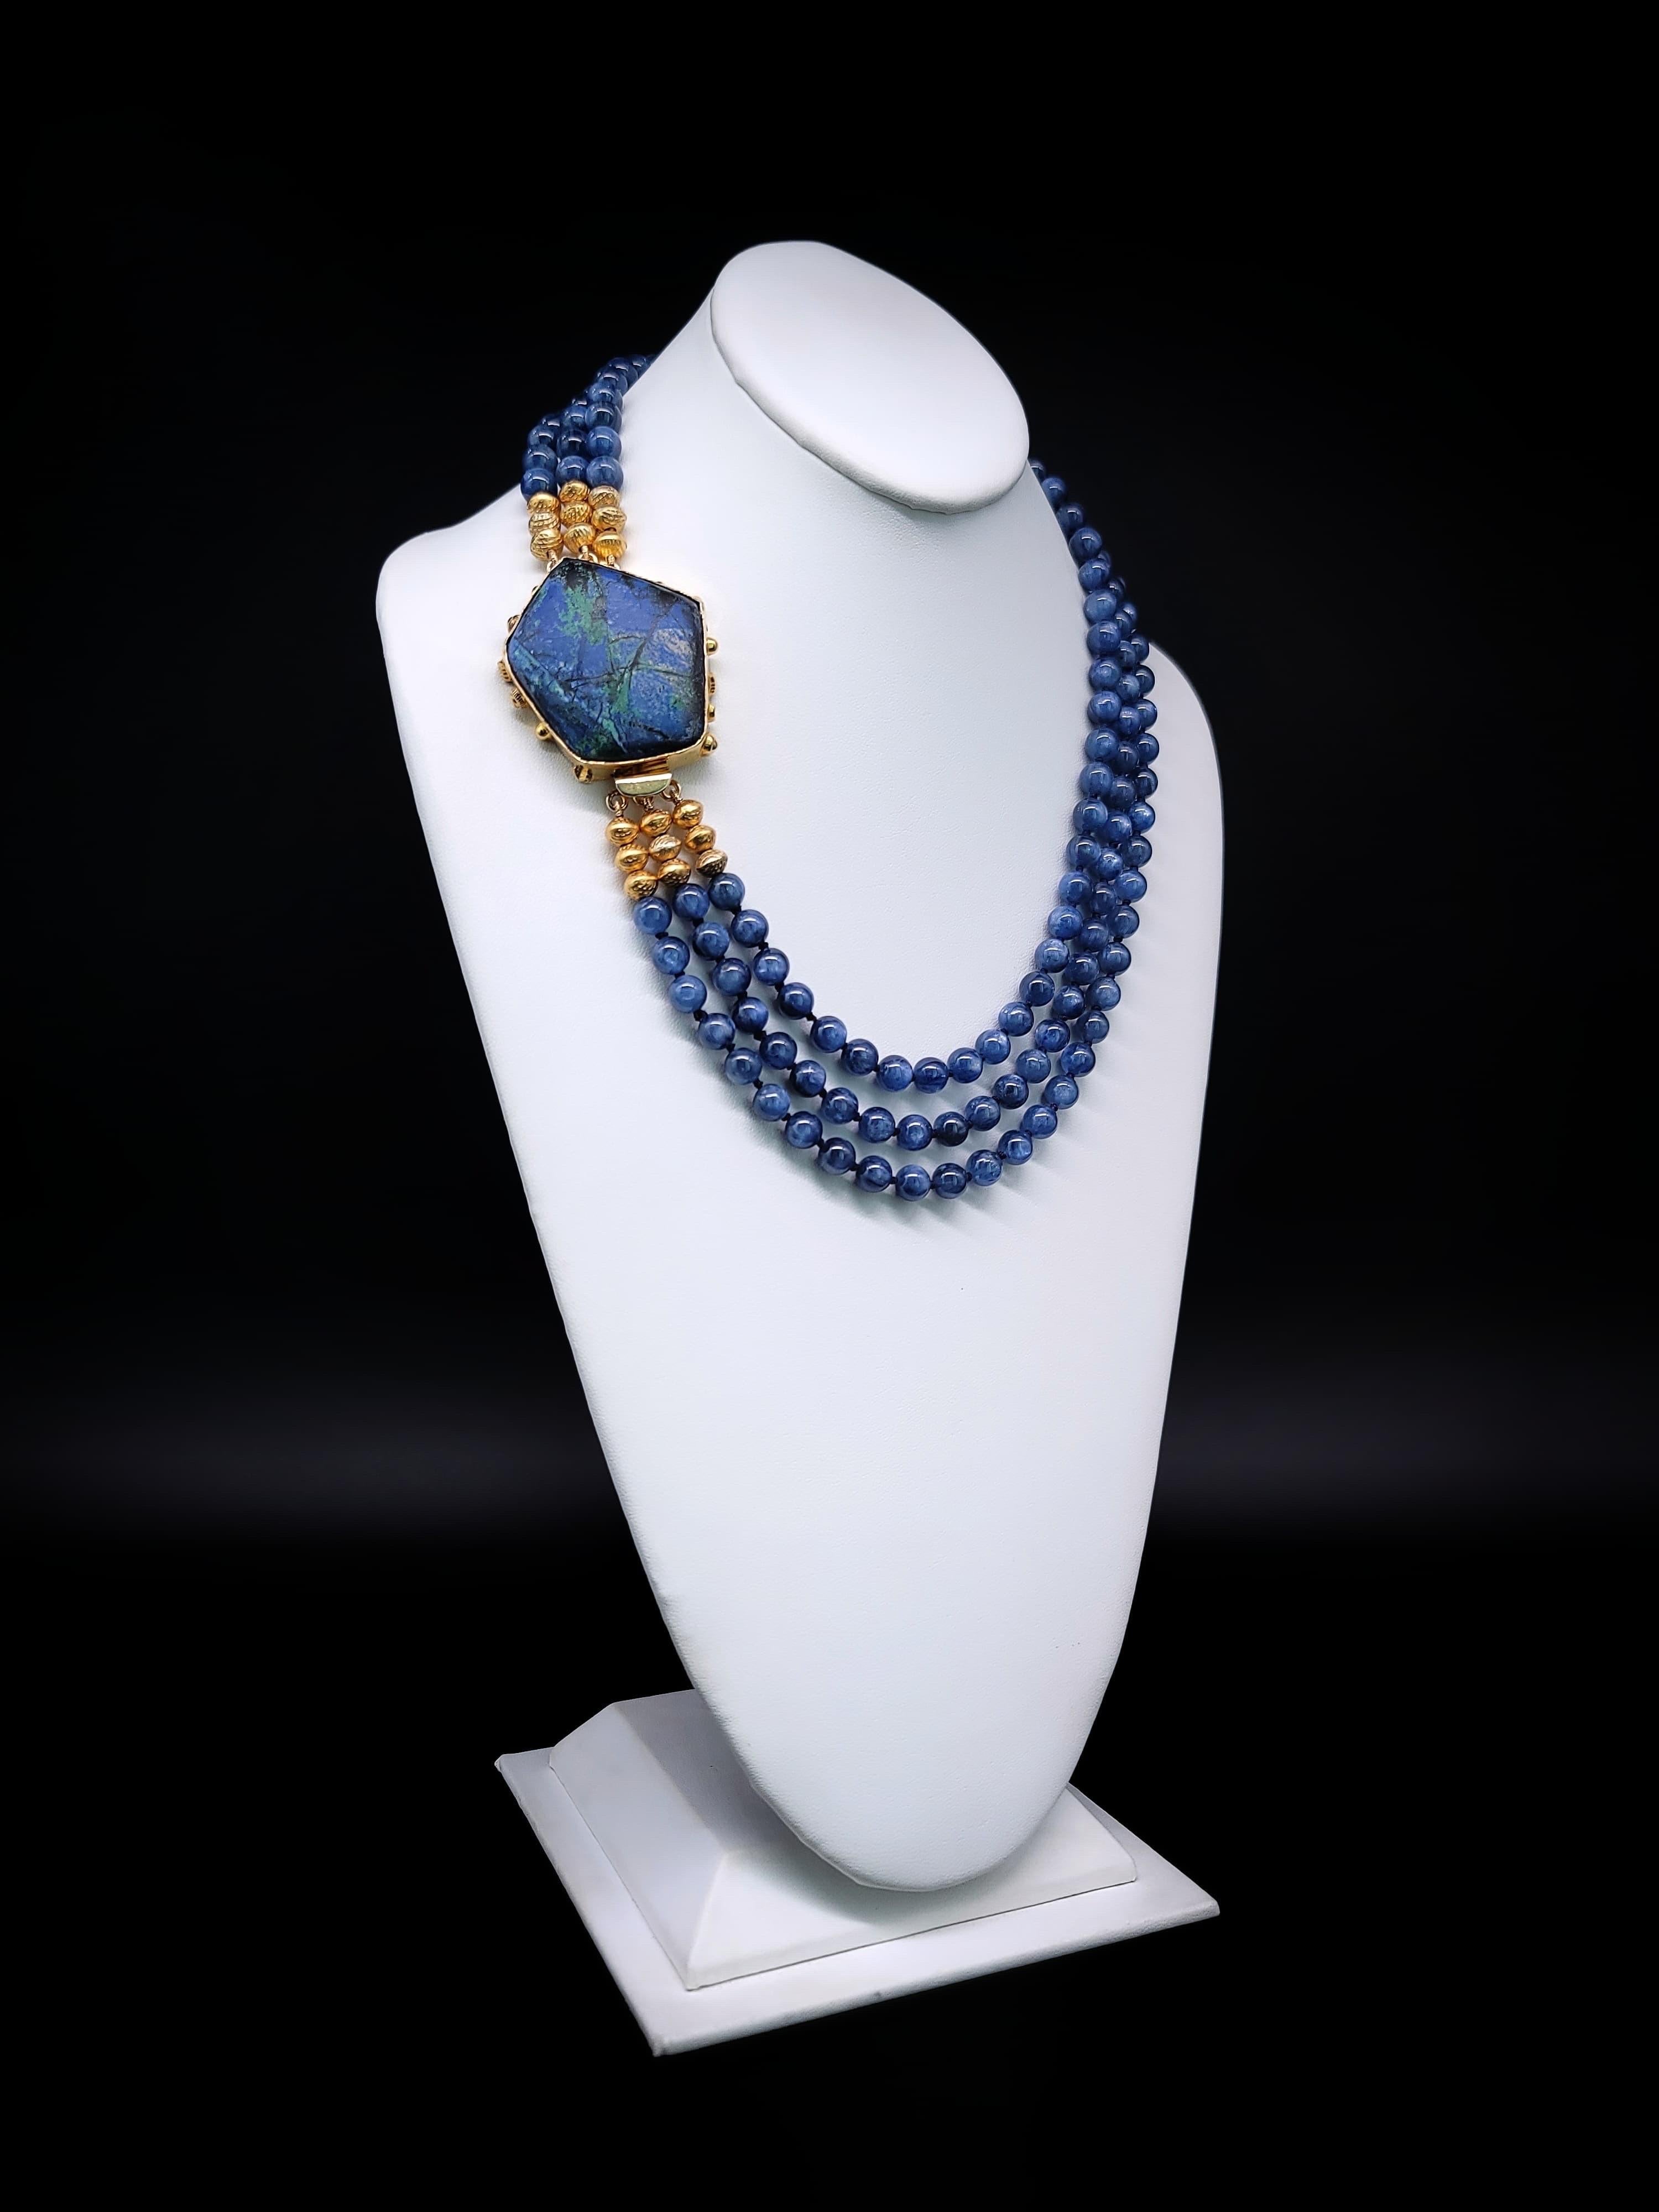 Women's or Men's A.Jeschel Polished Kyanite beads necklace with a Chrysocolla clasp. For Sale